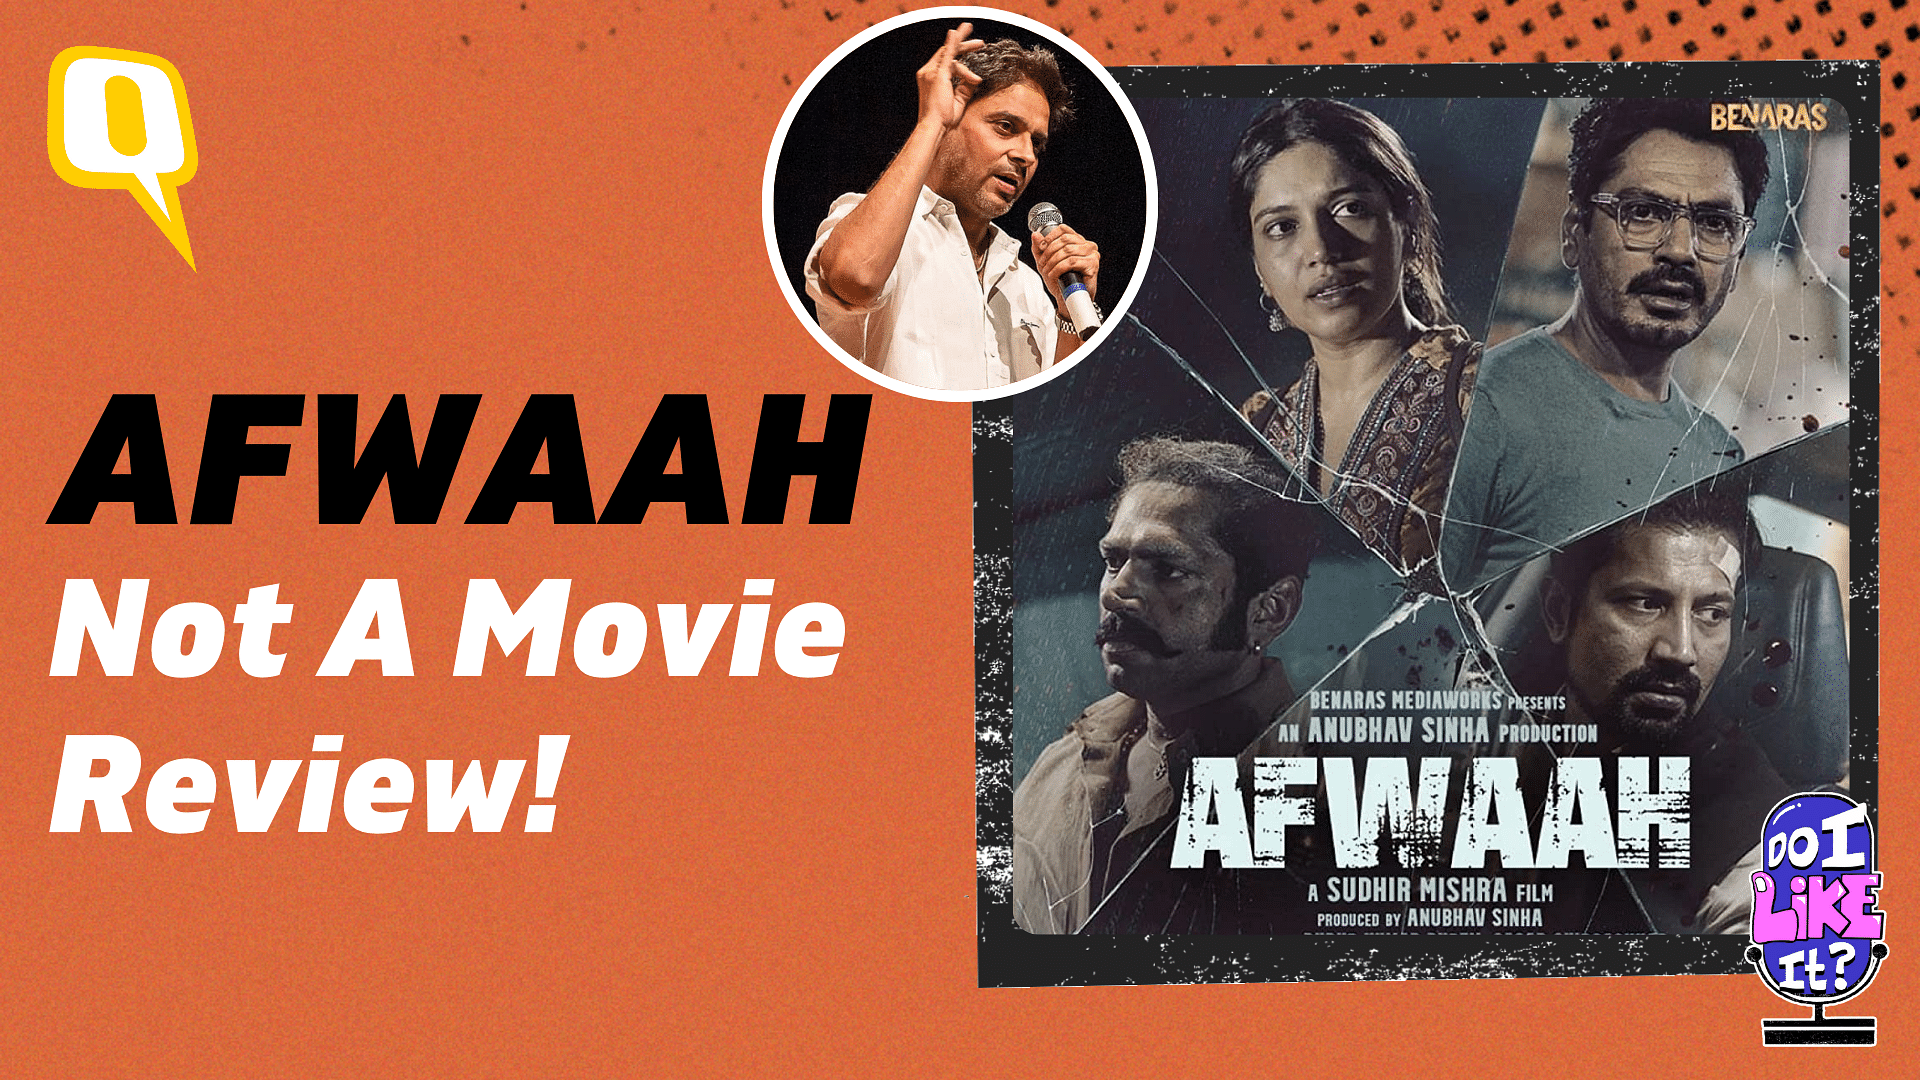 <div class="paragraphs"><p>Afwaah, starring Nawazuddin Siddiqui and Bhoomi Pednekar talks about how one rumor can change people's lives.</p></div>